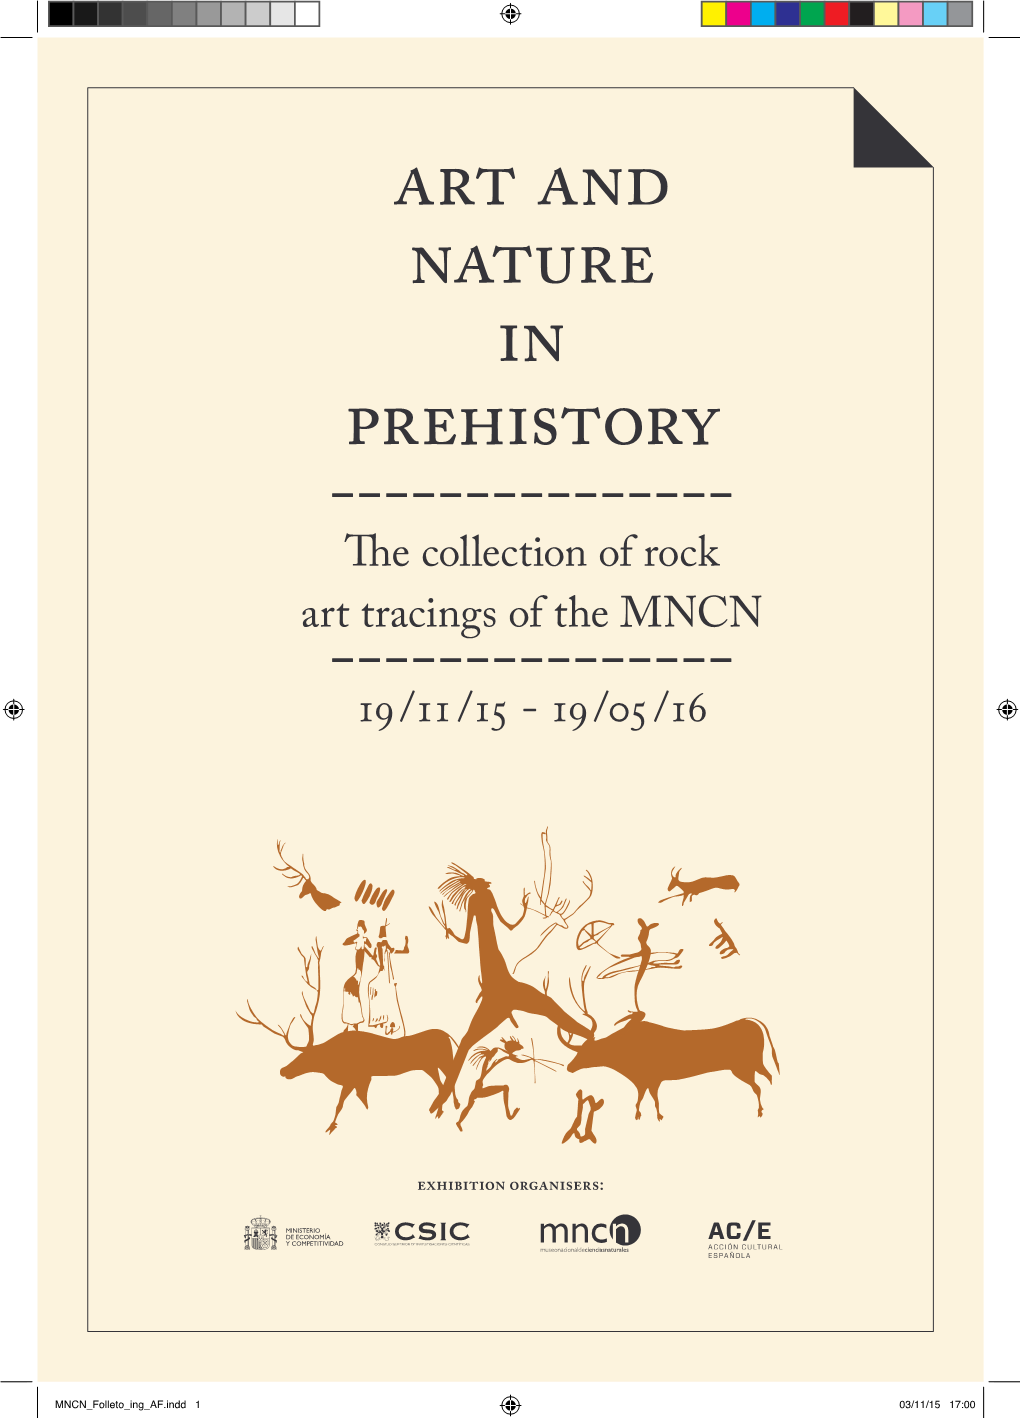 Art and Nature in Prehistory ------The Collection of Rock Art Tracings of the MNCN ------19 /11/15 - 19 /05/16